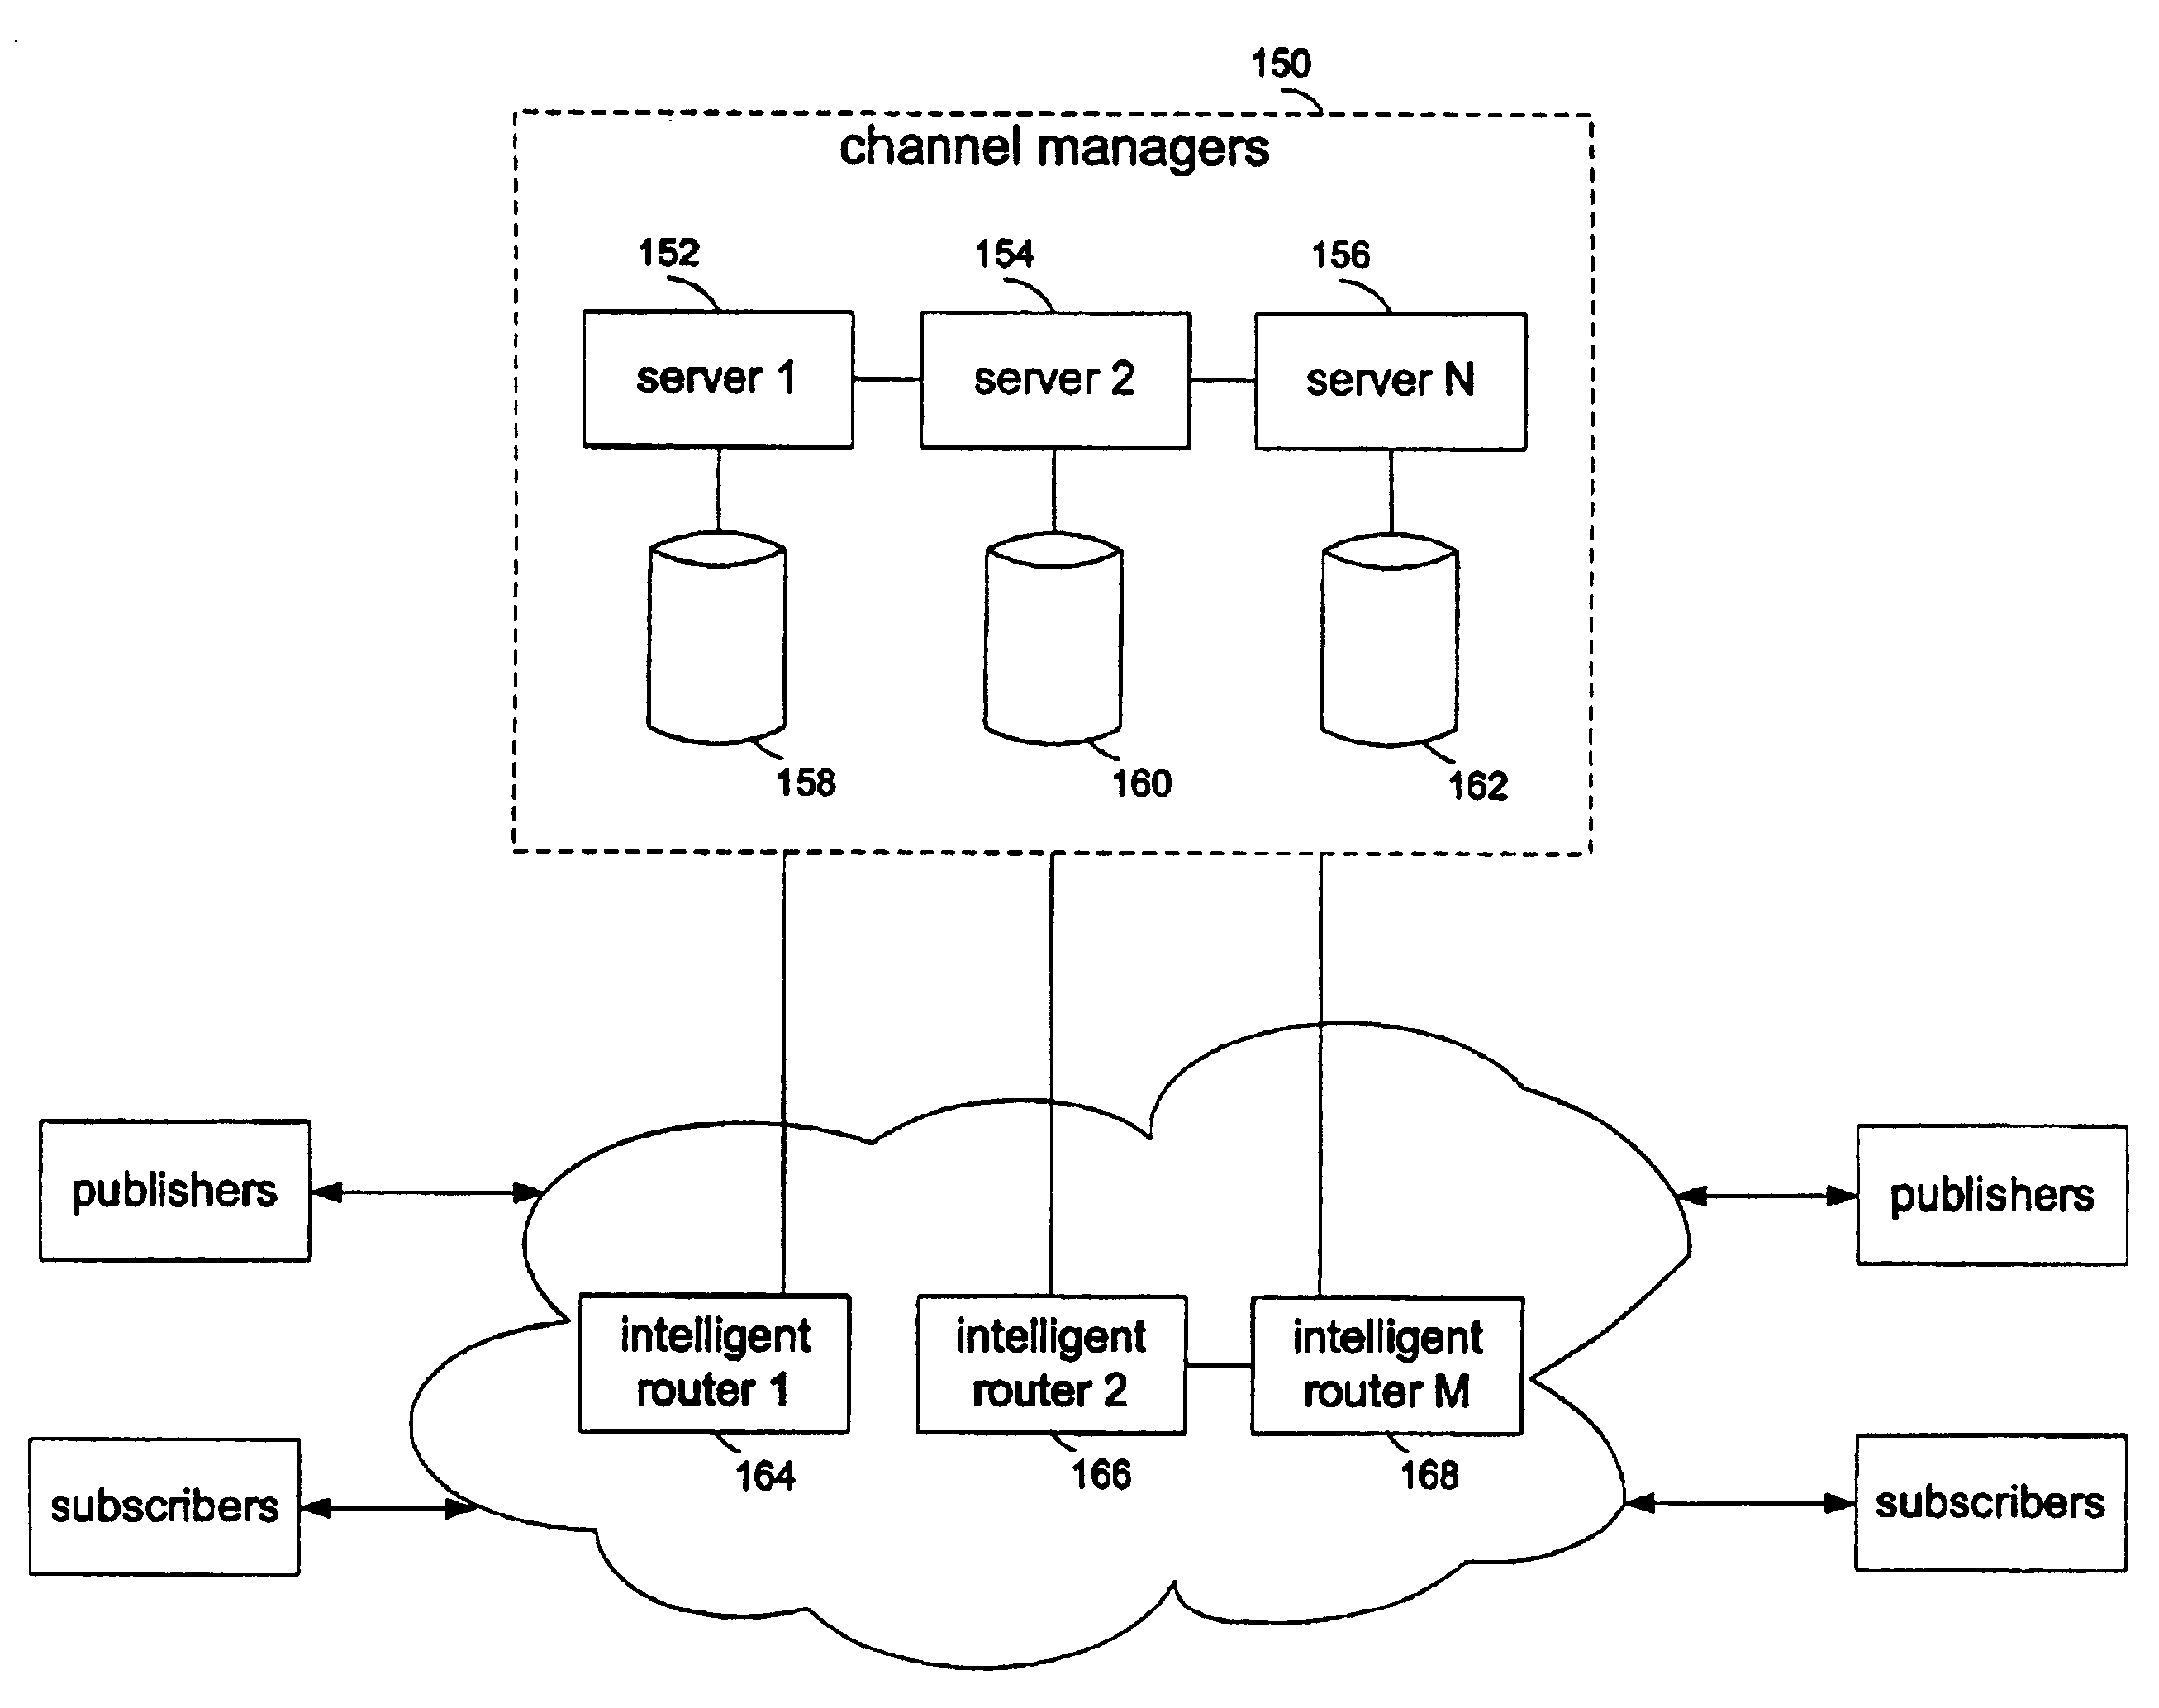 Method for storing Boolean functions to enable evaluation, modification, reuse, and delivery over a network